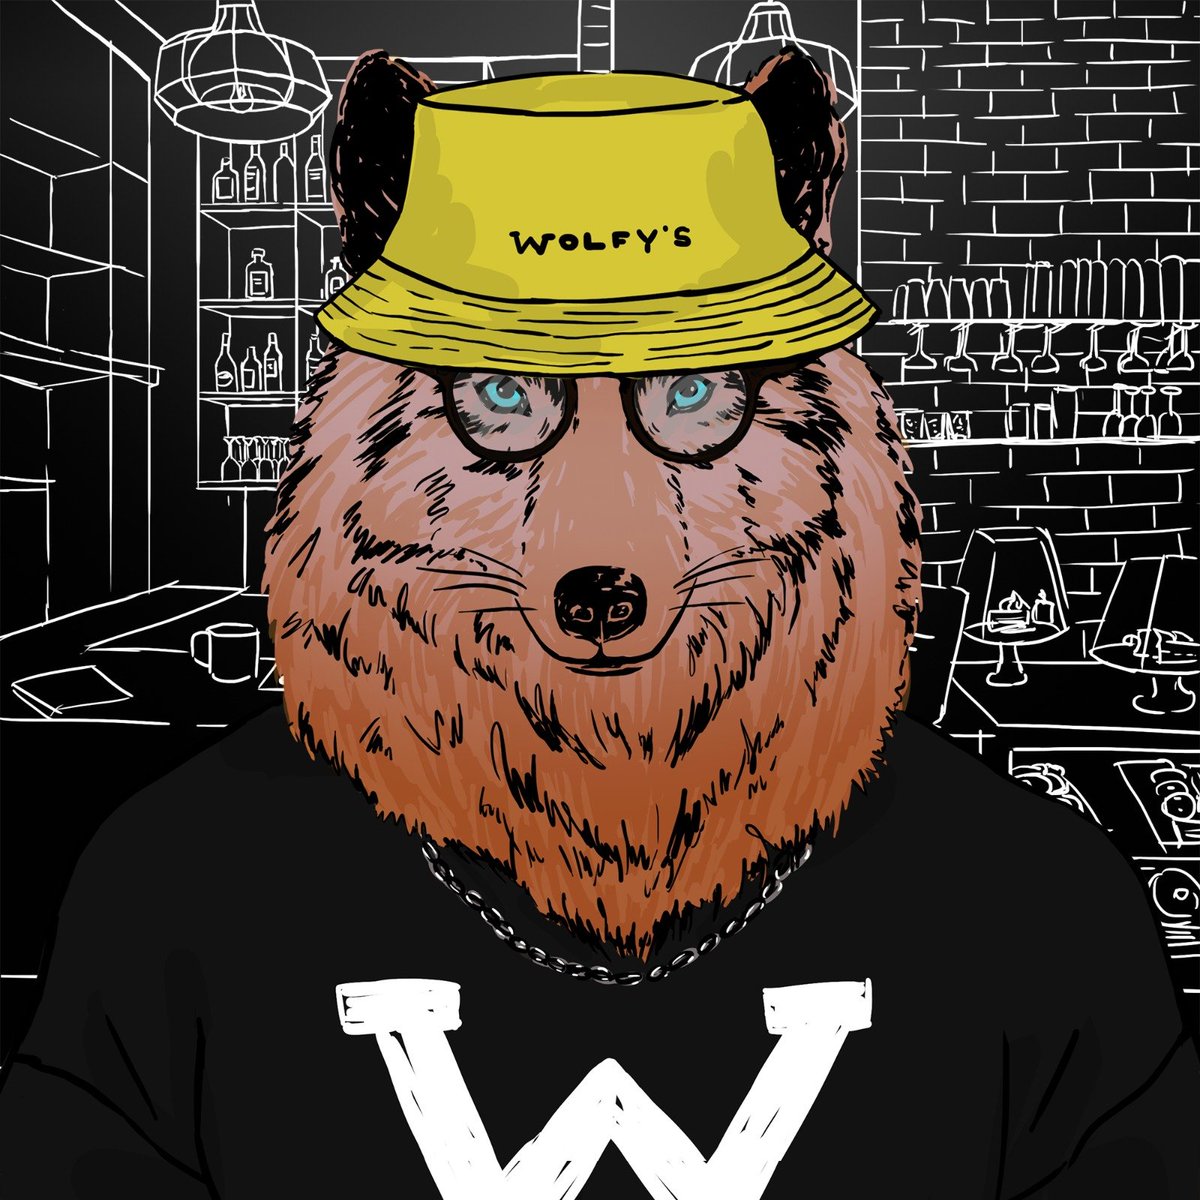 🌟 Grab a Wolfy's Bar NFT at a 30% discount! It's a smart buy for exclusive benefits and a unique addition to your digital collection. Act now and be part of the future! #WolfysNFT #CryptoArt #FutureOfArt 🎨✨ hel.io/x/WolfysBarAmE…